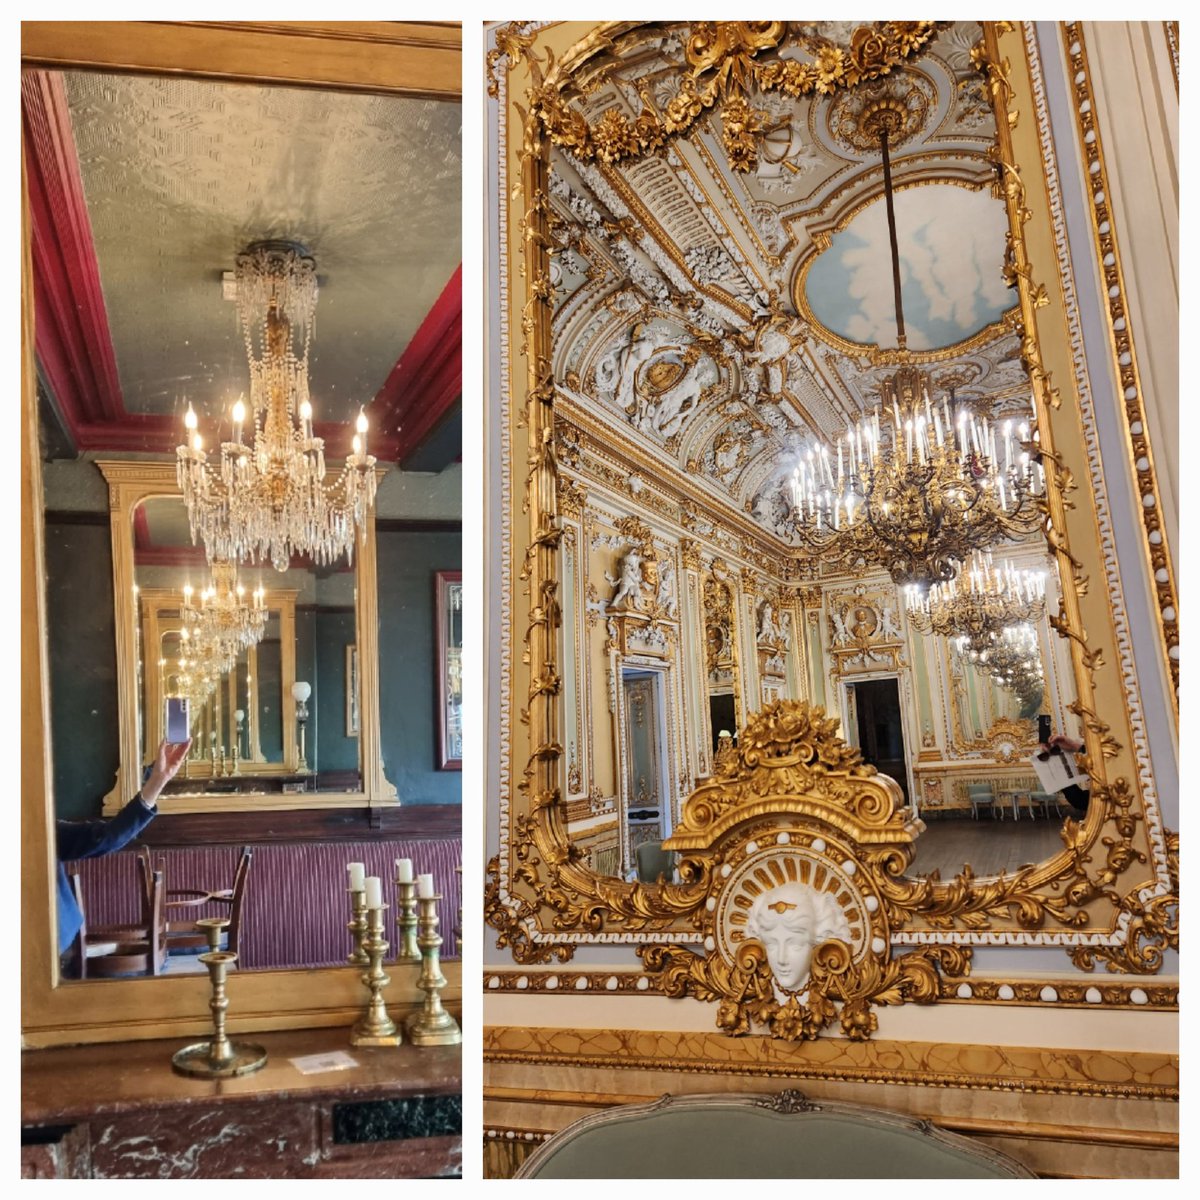 When you just love infinity chandeliers.  You have a challenger for the prettiest ones @thecardiganarms in @palazzoparisio 
##ihavethebestclients